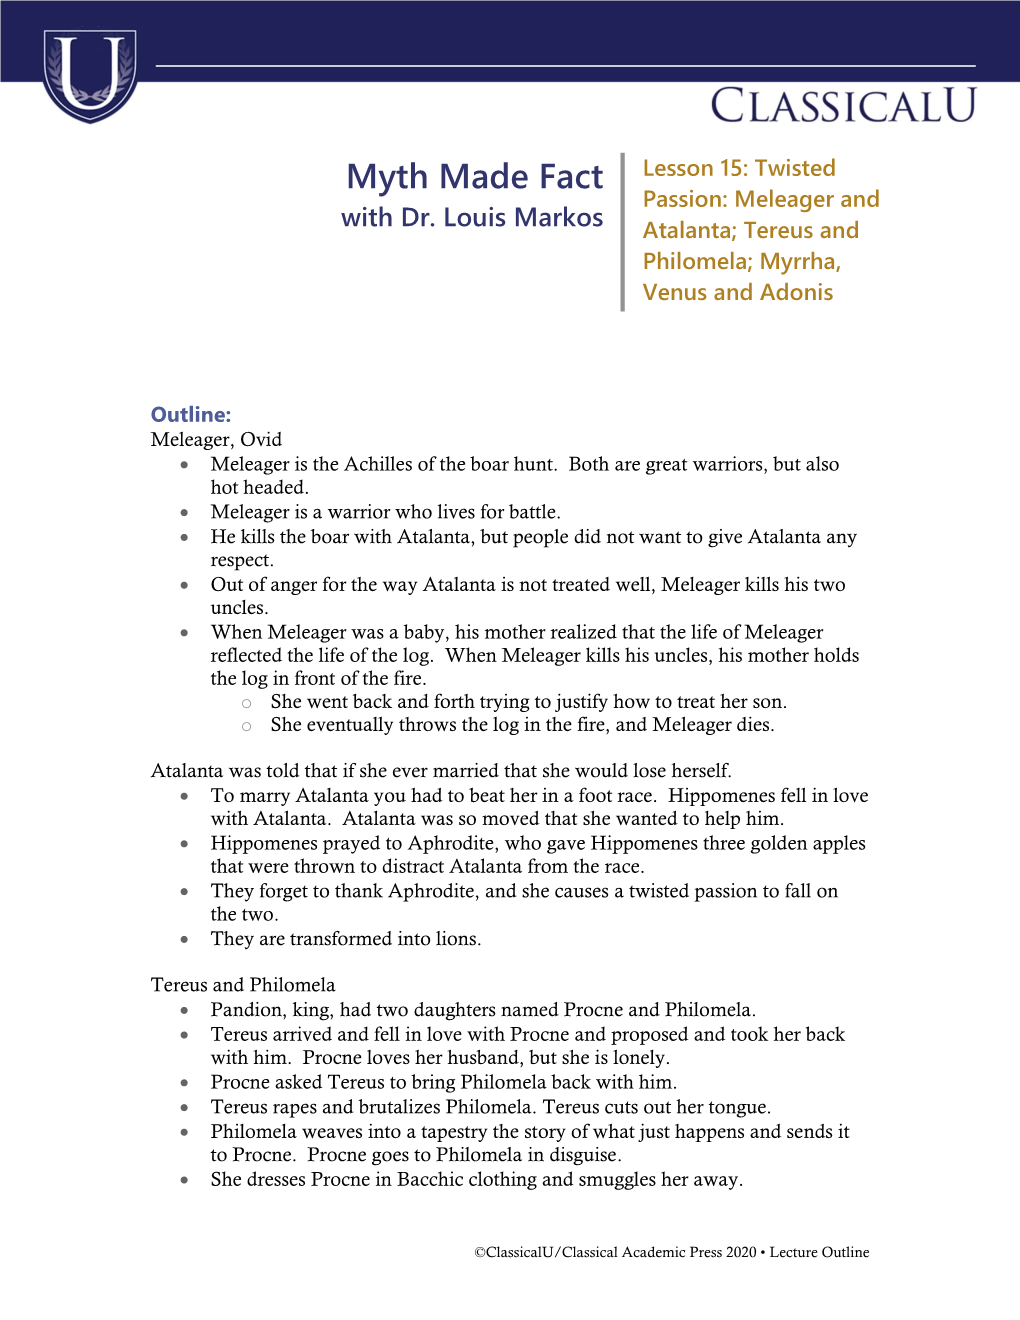 Myth Made Fact Lesson 15: Twisted Passion: Meleager and with Dr